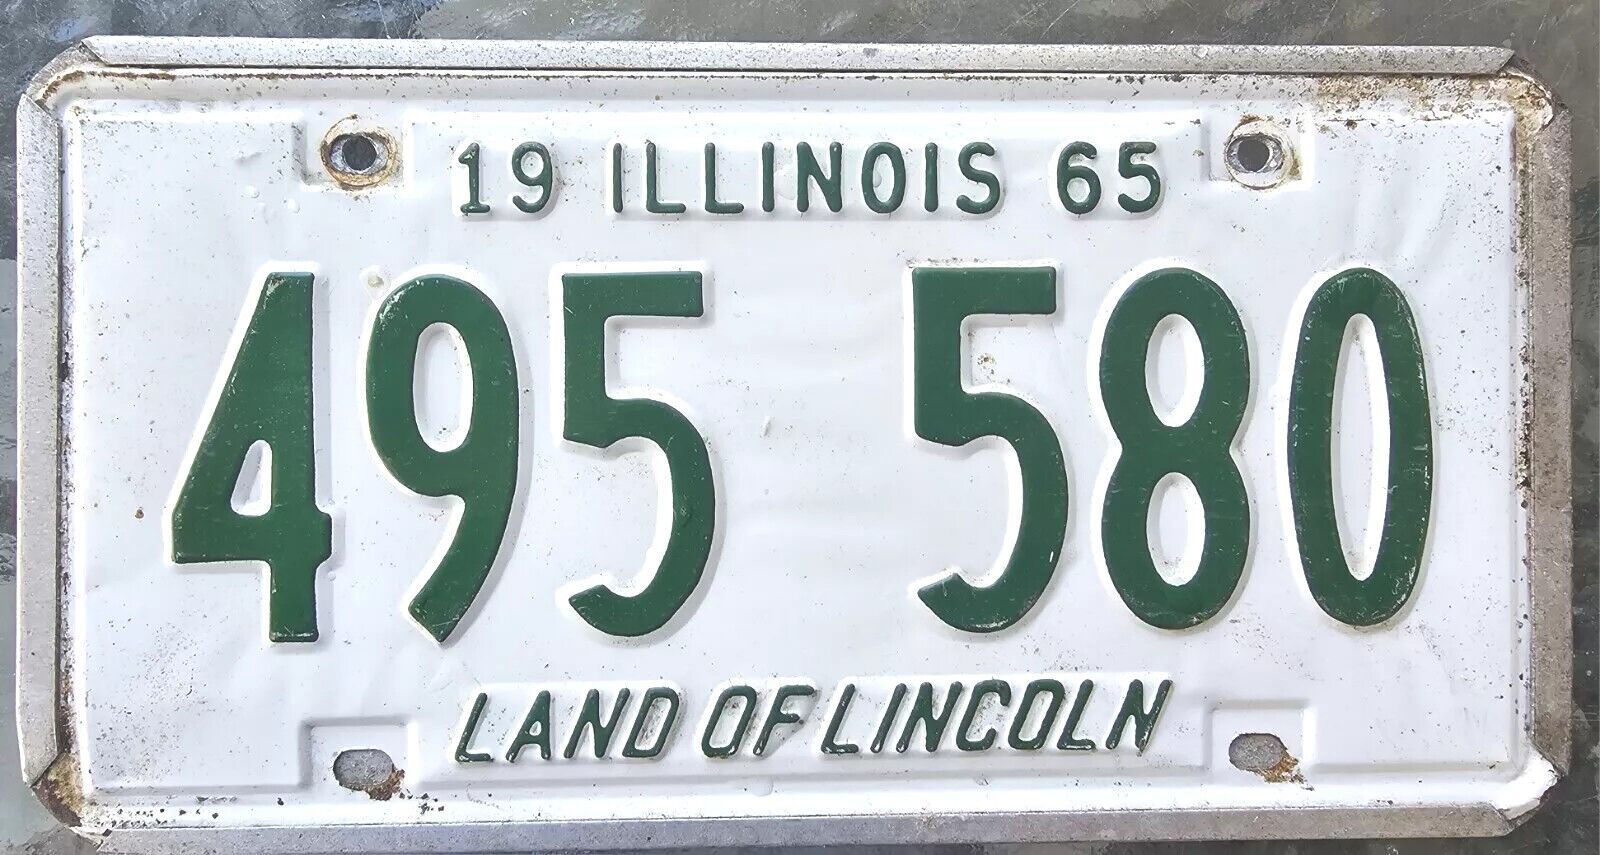 Illinois License Plate 1965 495 580 Land Of Lincoln